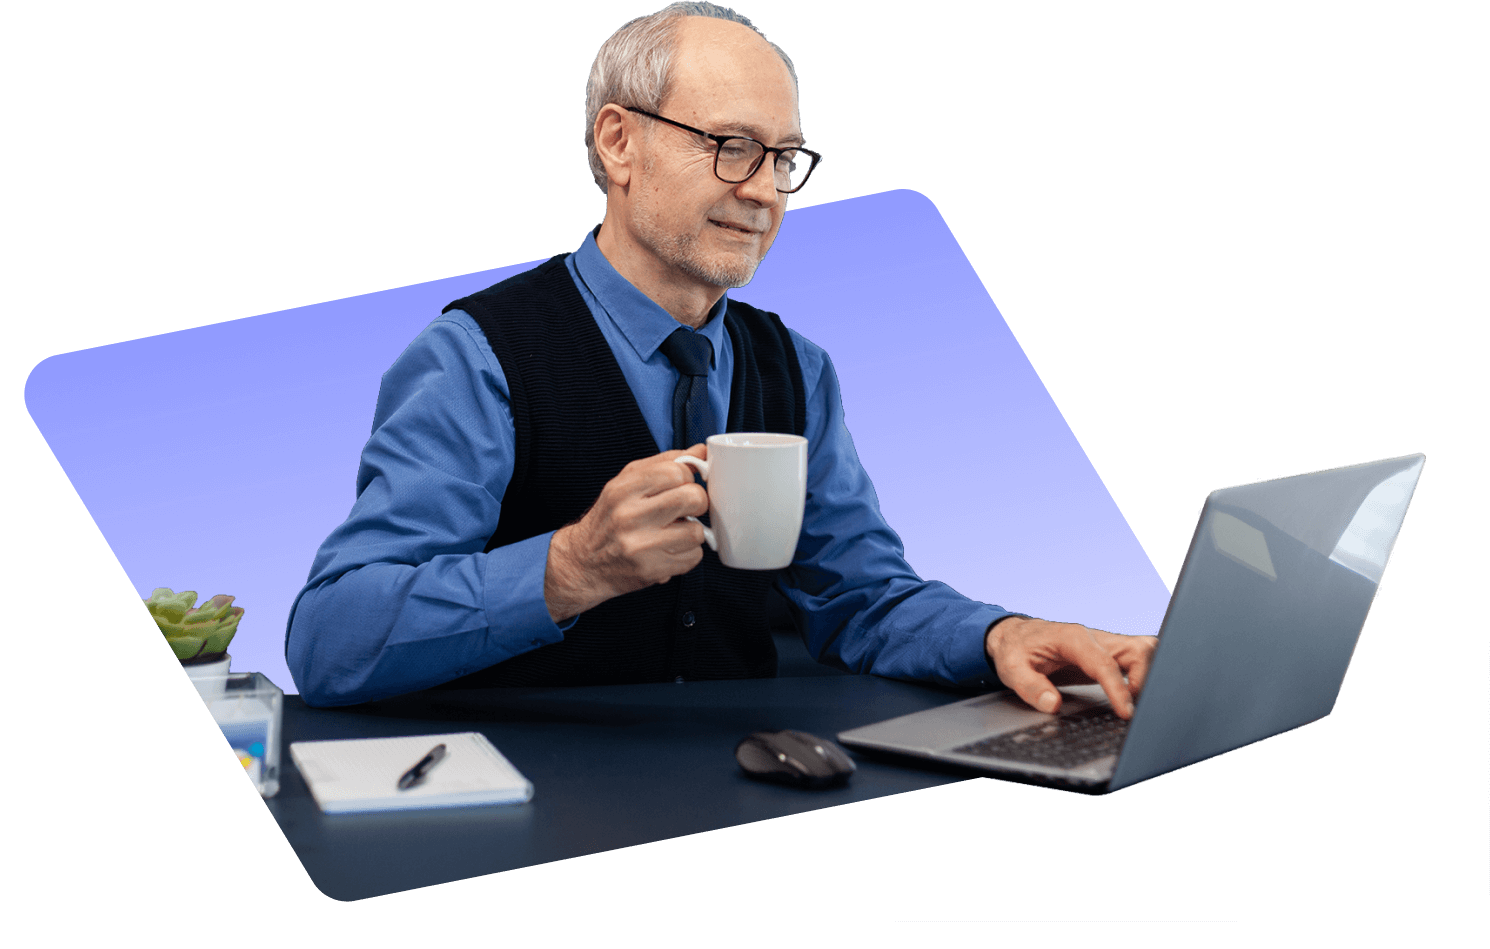 Senior employee with a laptop in one hand and a cup of coffee in the other